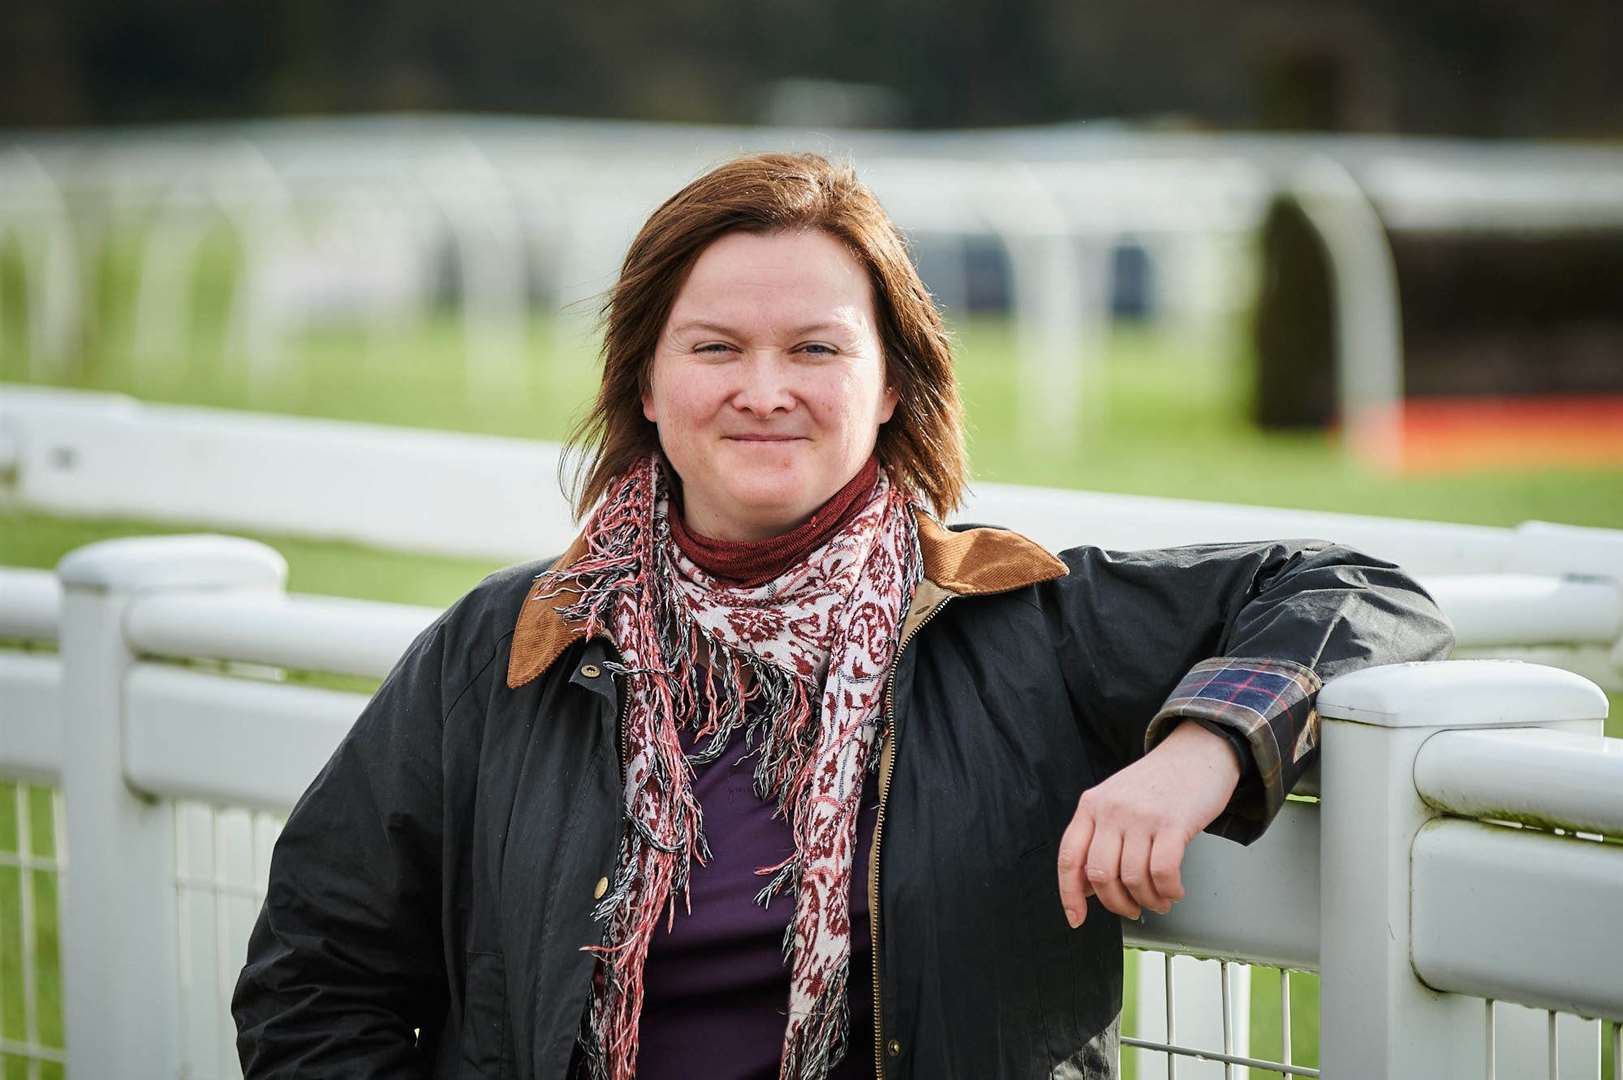 Jenny McKerr won the Diversification Award for her first generation agritourism business